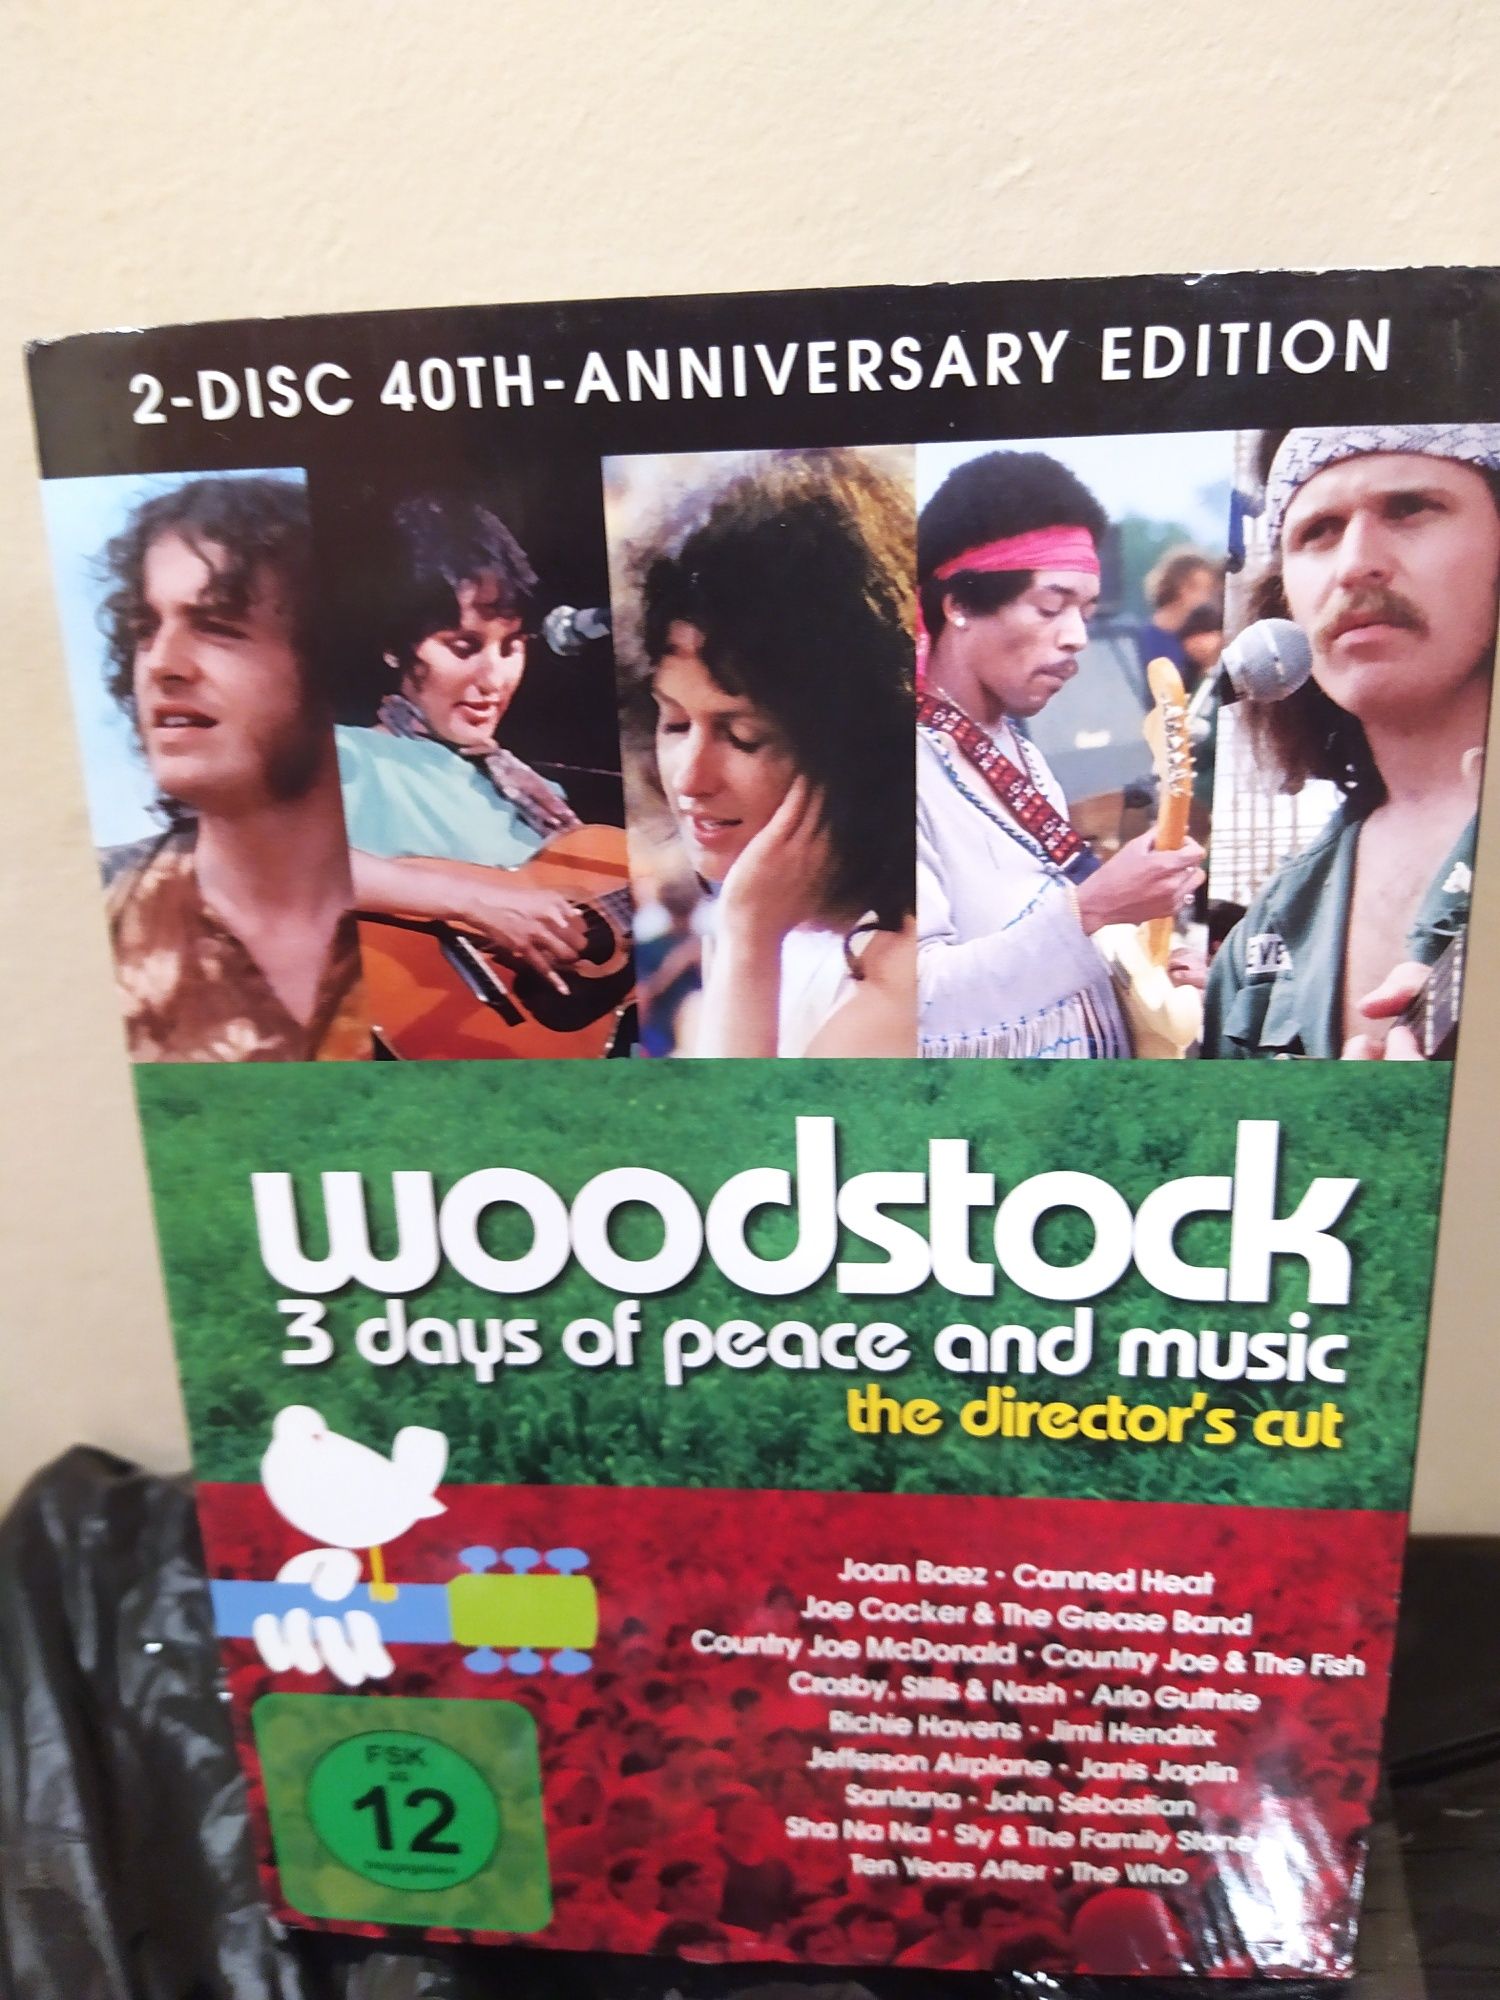 Woodstock 3 days of peace and music